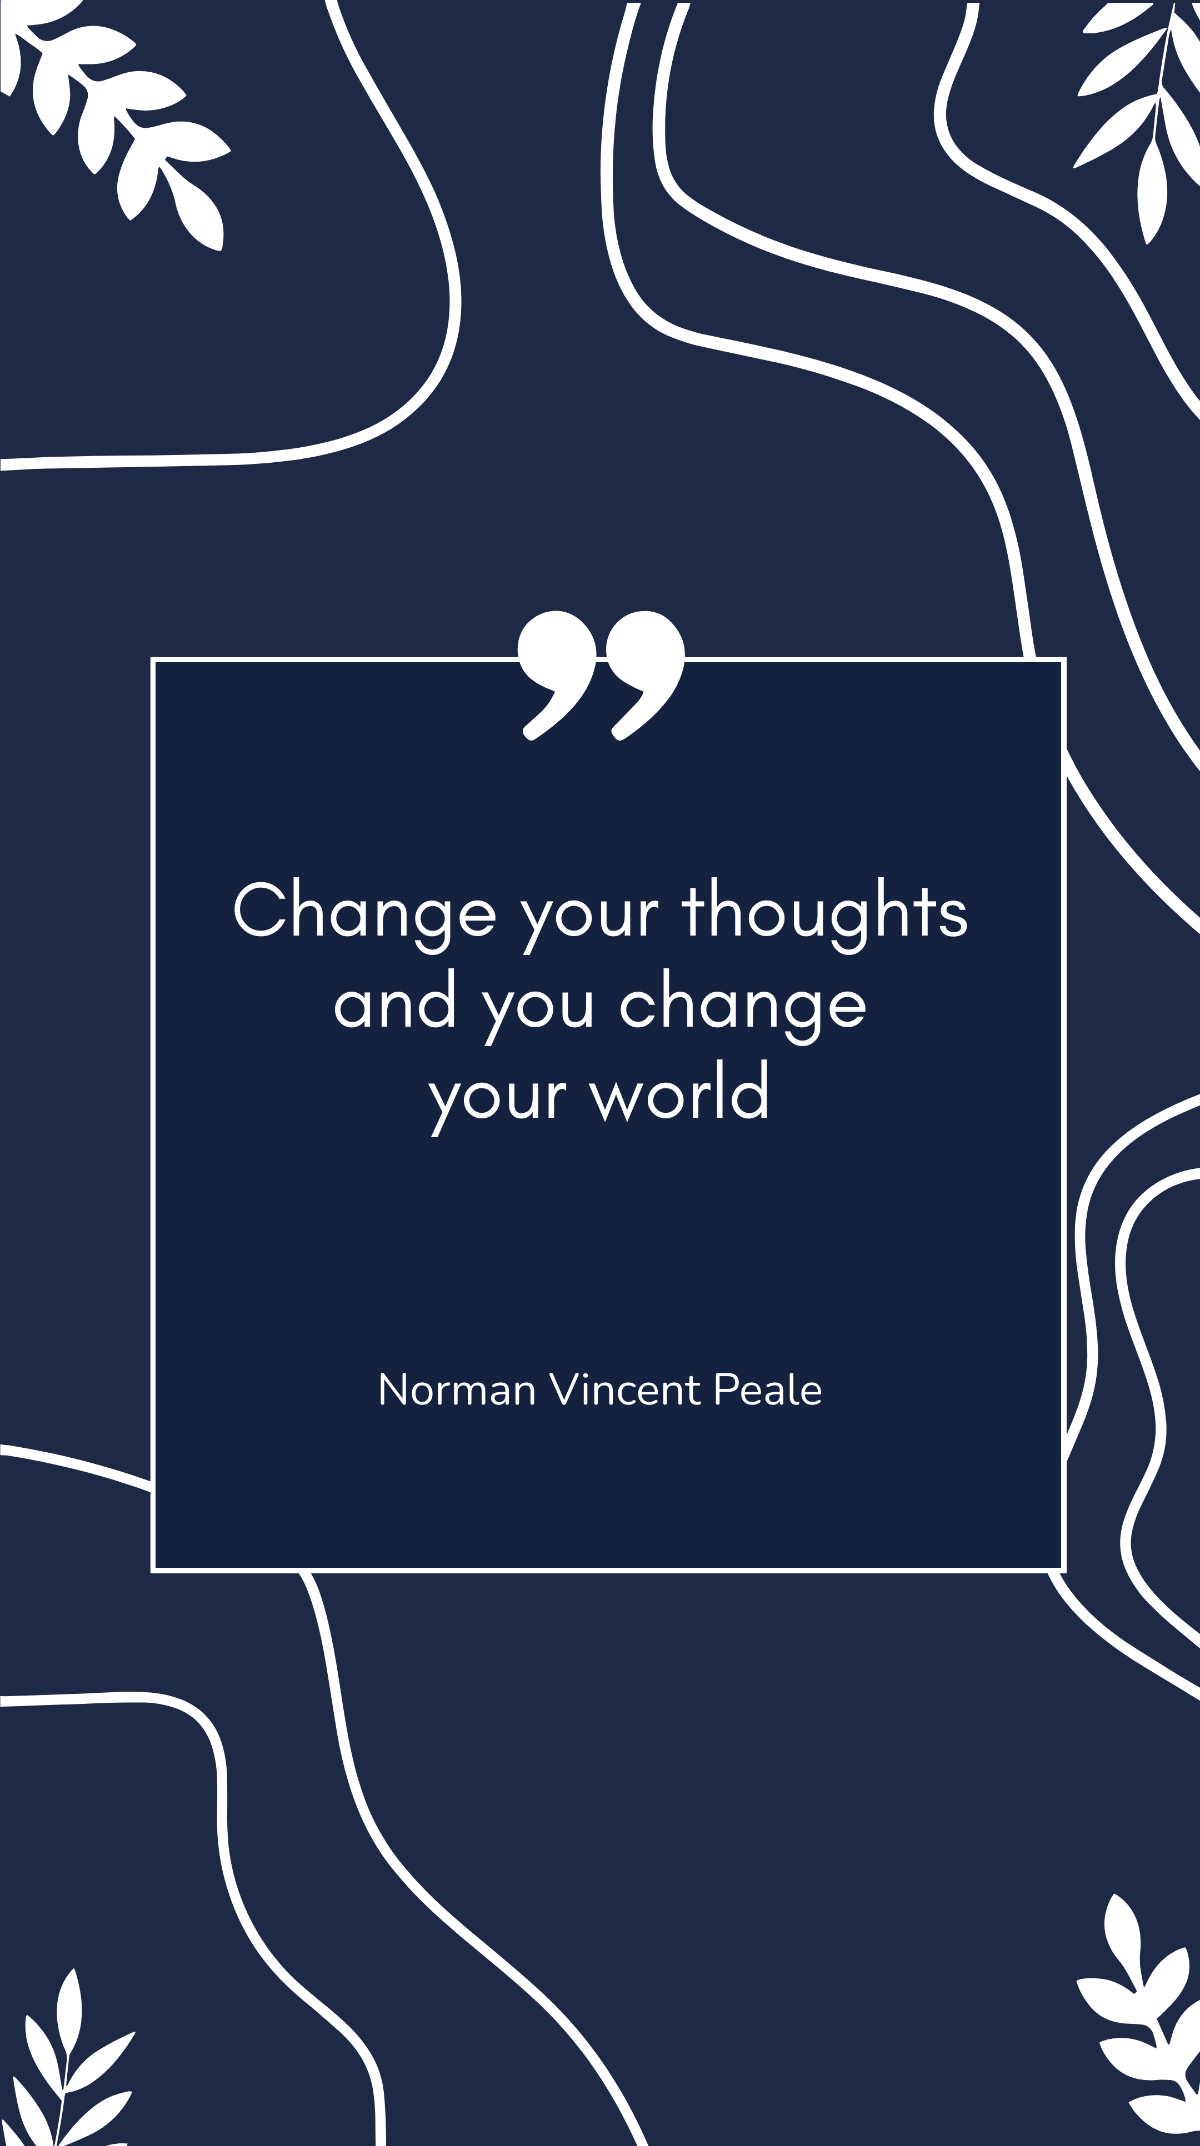 Norman Vincent Peale - Change your thoughts and you change your world Template